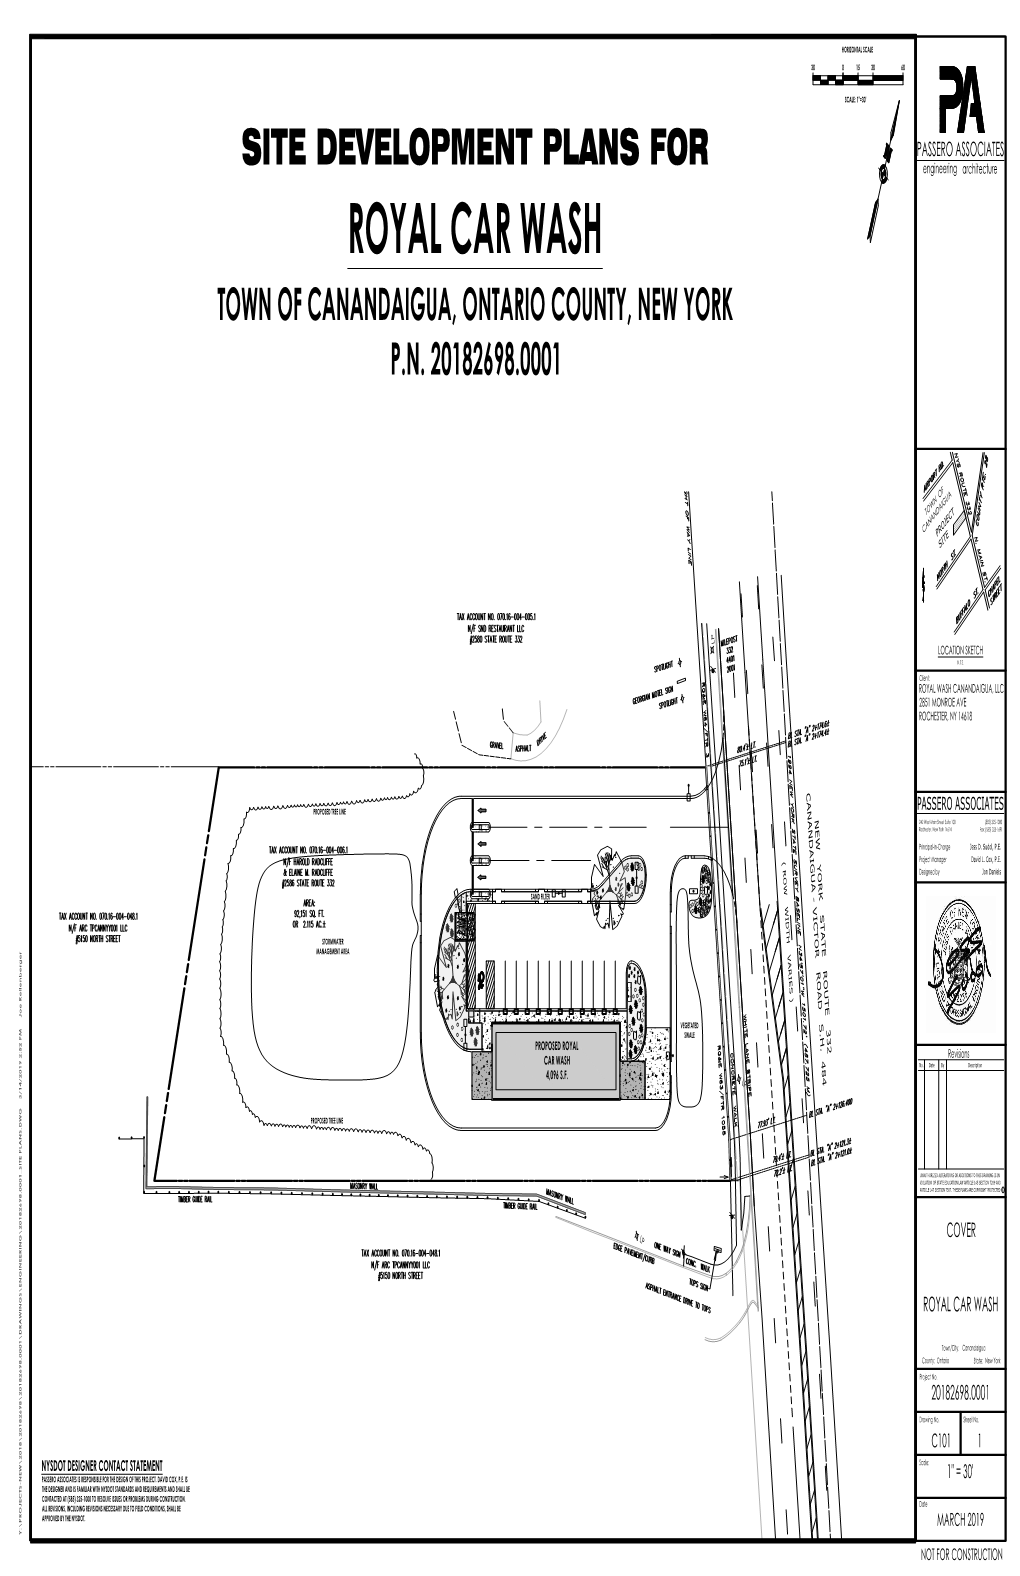 Site Development Plans for Proposed Tree Line Proposed Tree Line Management Area Stormwater Royal Car Wash P.N